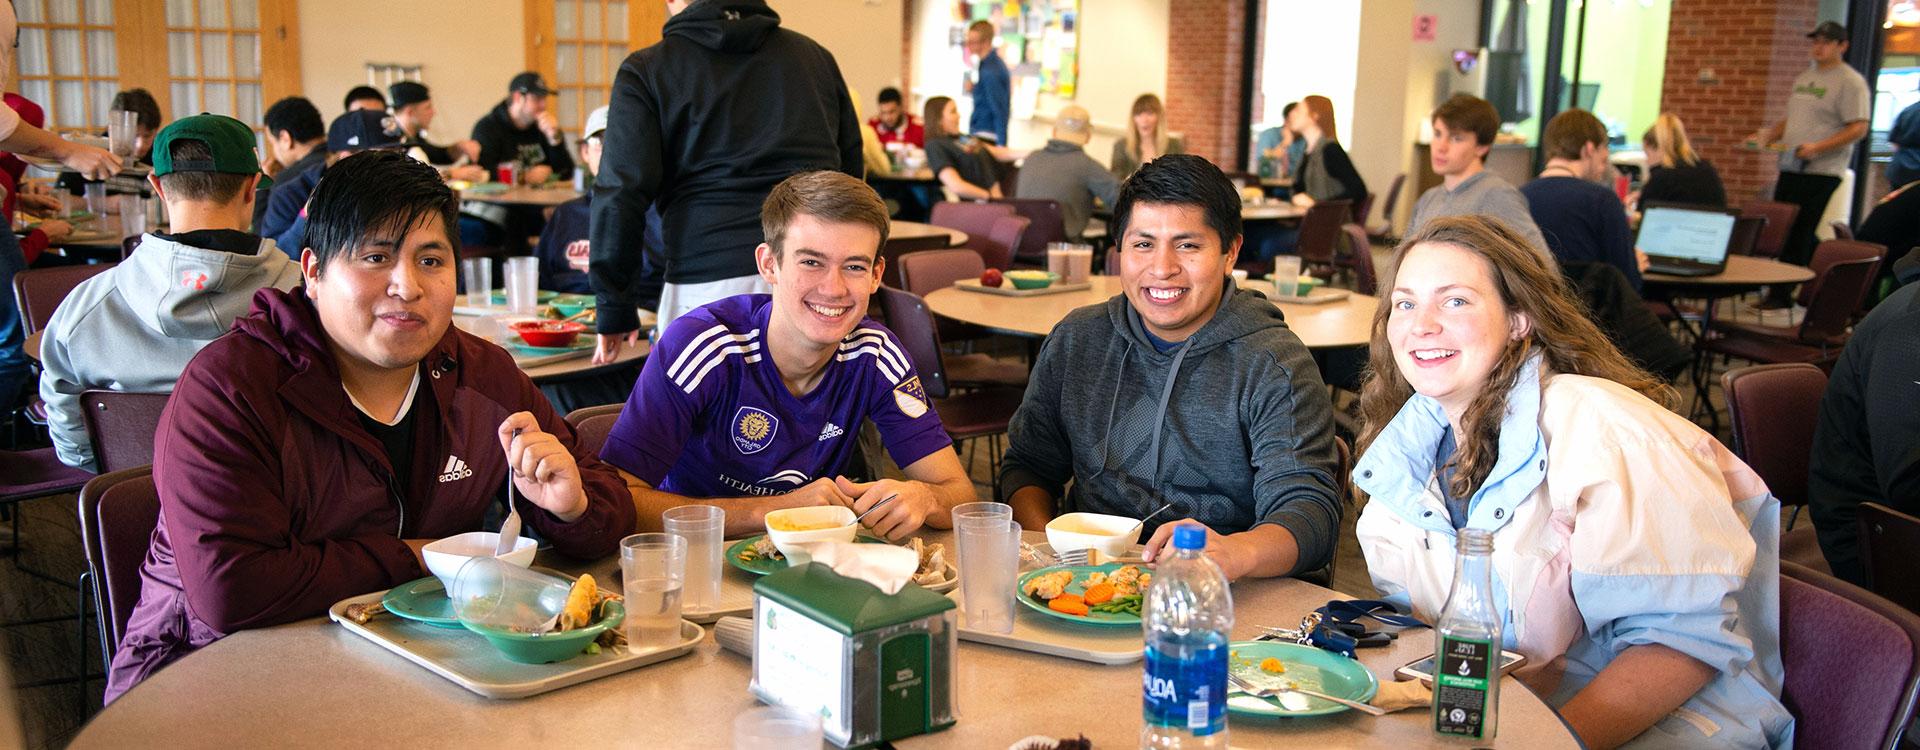 Students eating in Campus Center